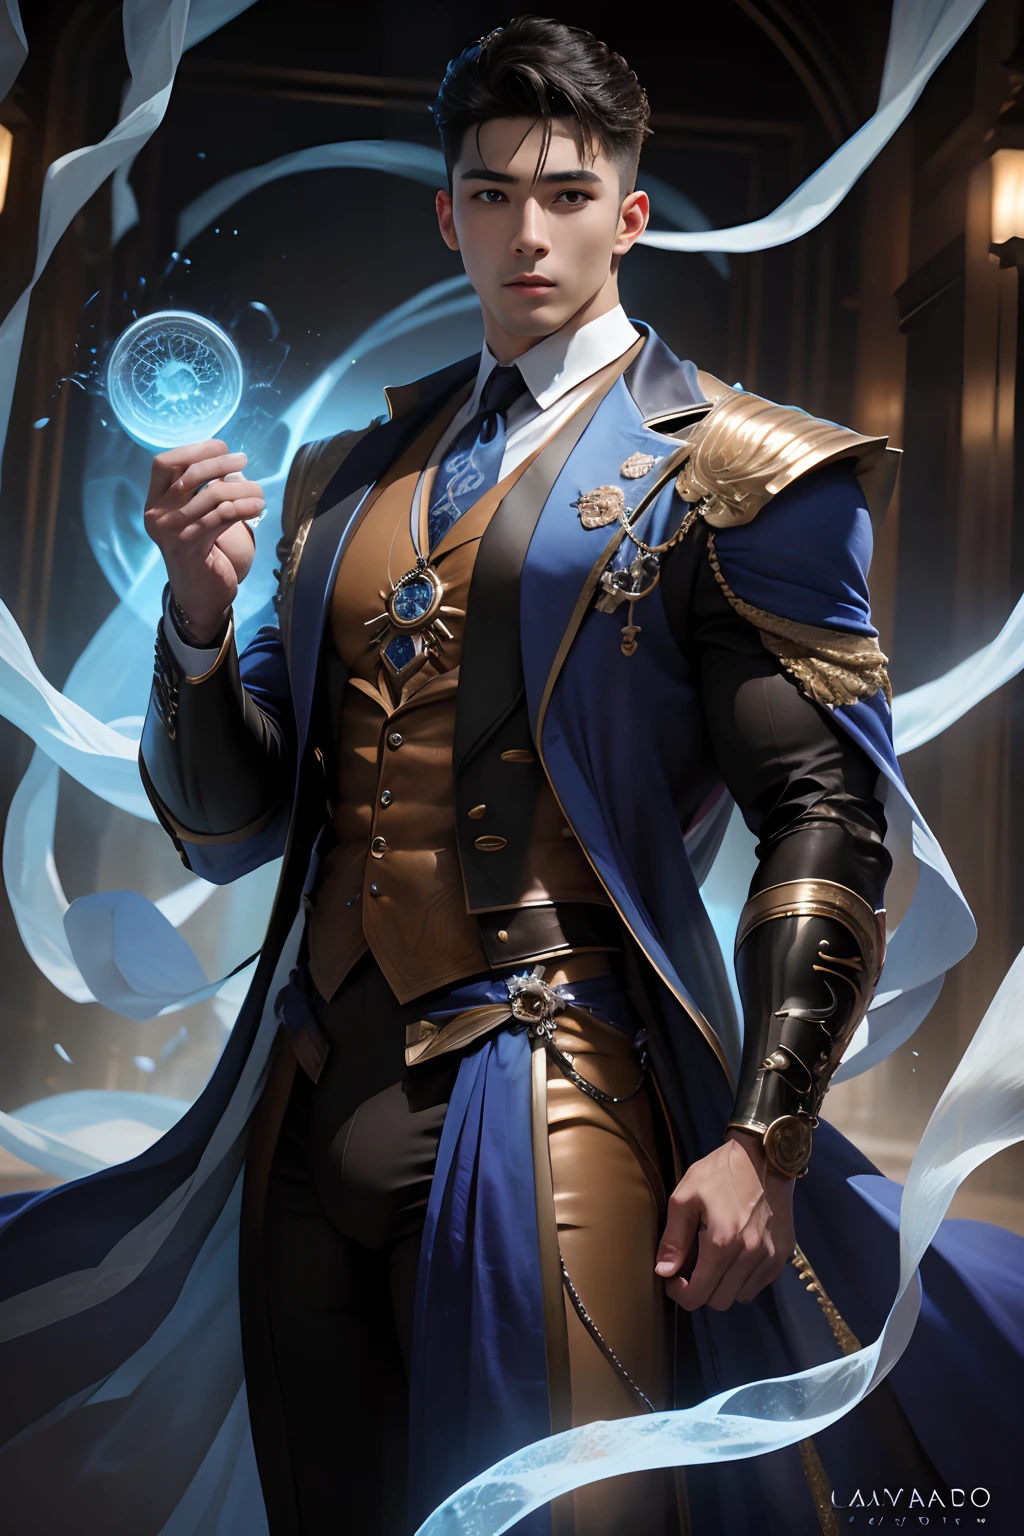 1 korean man, the 20s, only, Masterpiece, Perfect face, muscled body, whole body, (bare chest), (bare chest), muscular chest, abs, detailed tailcoat, monocle, has, short hair, pretty blue eyes, perfect hands, gloves, Strict and dynamic posture, personal, Nardack, Magic City Fund, with magic circles, background rays